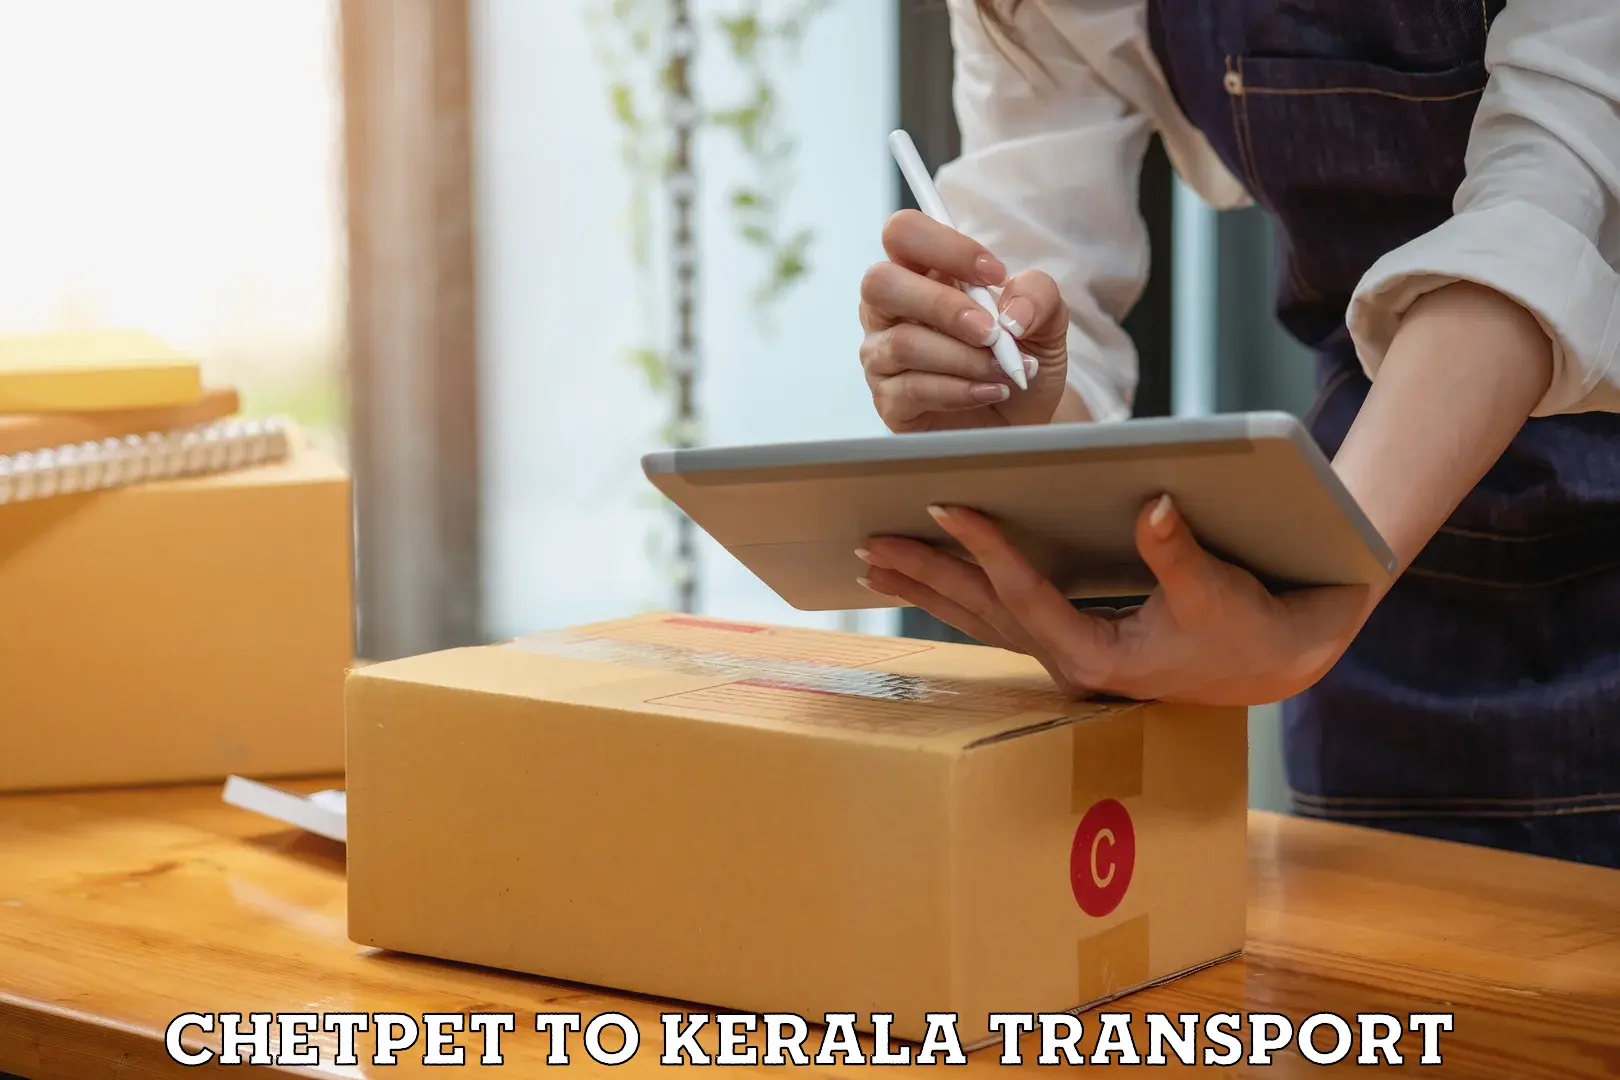 Delivery service Chetpet to Kerala